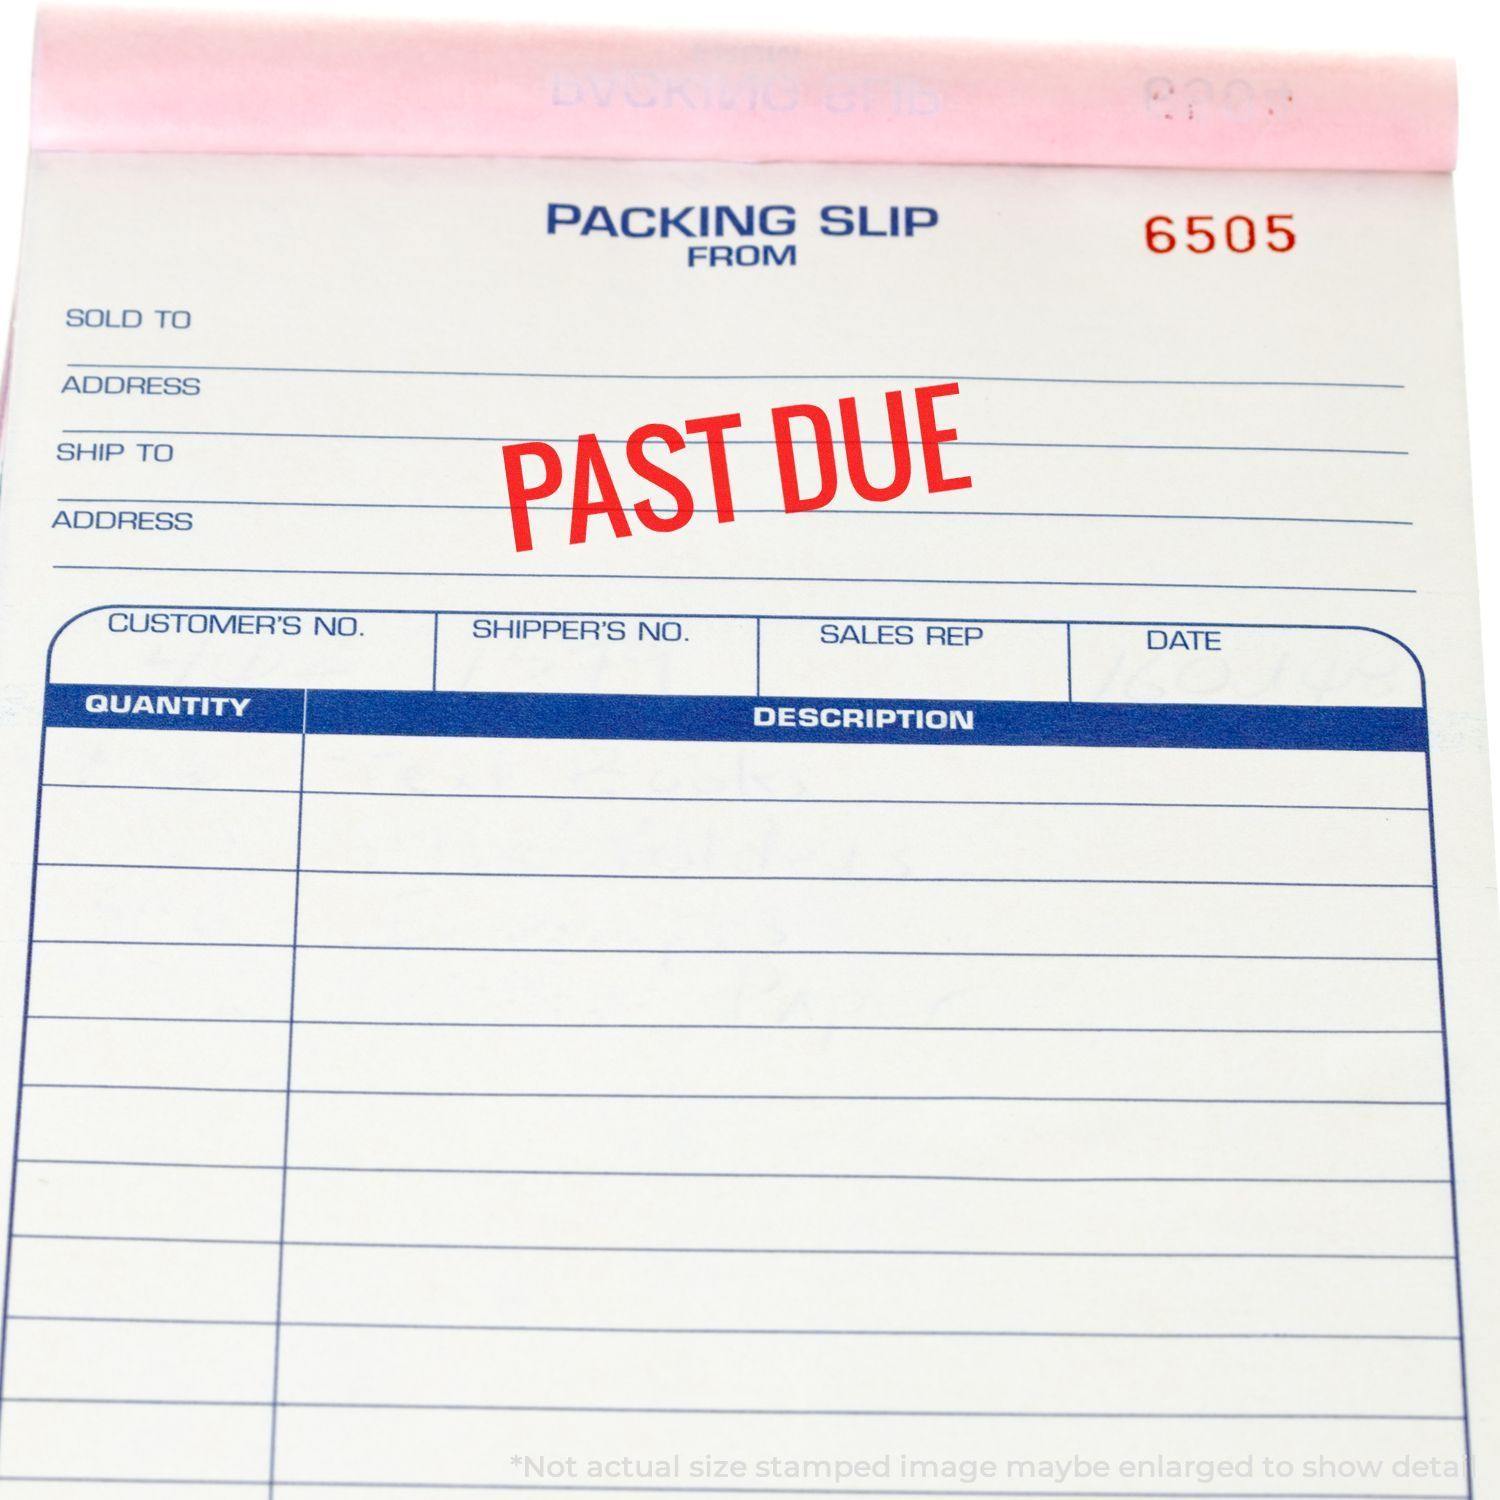 A stock office rubber stamp with a stamped image showing how the text "PAST DUE" in a narrow bold font is displayed after stamping.